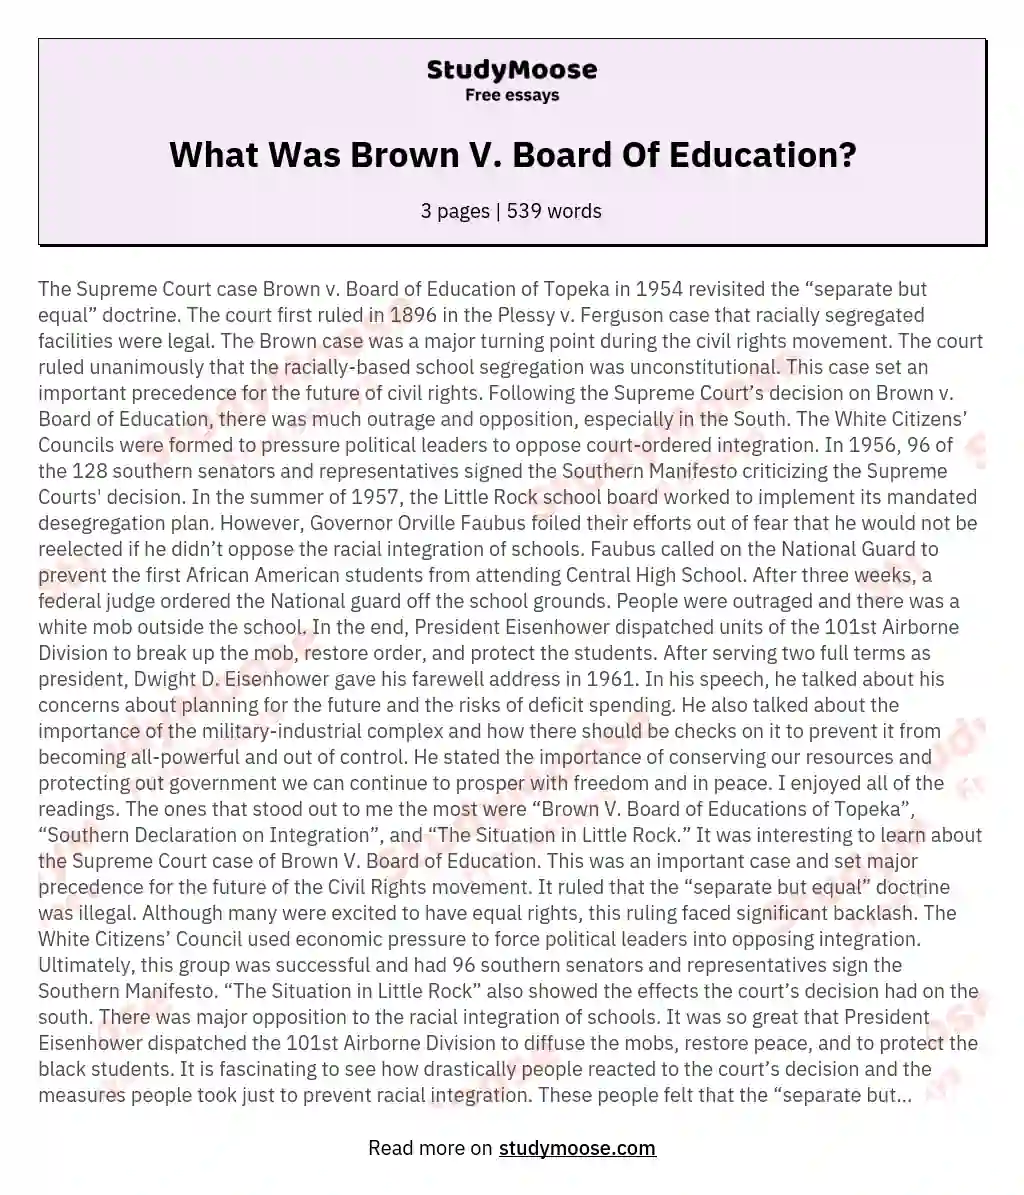 What Was Brown V. Board Of Education?